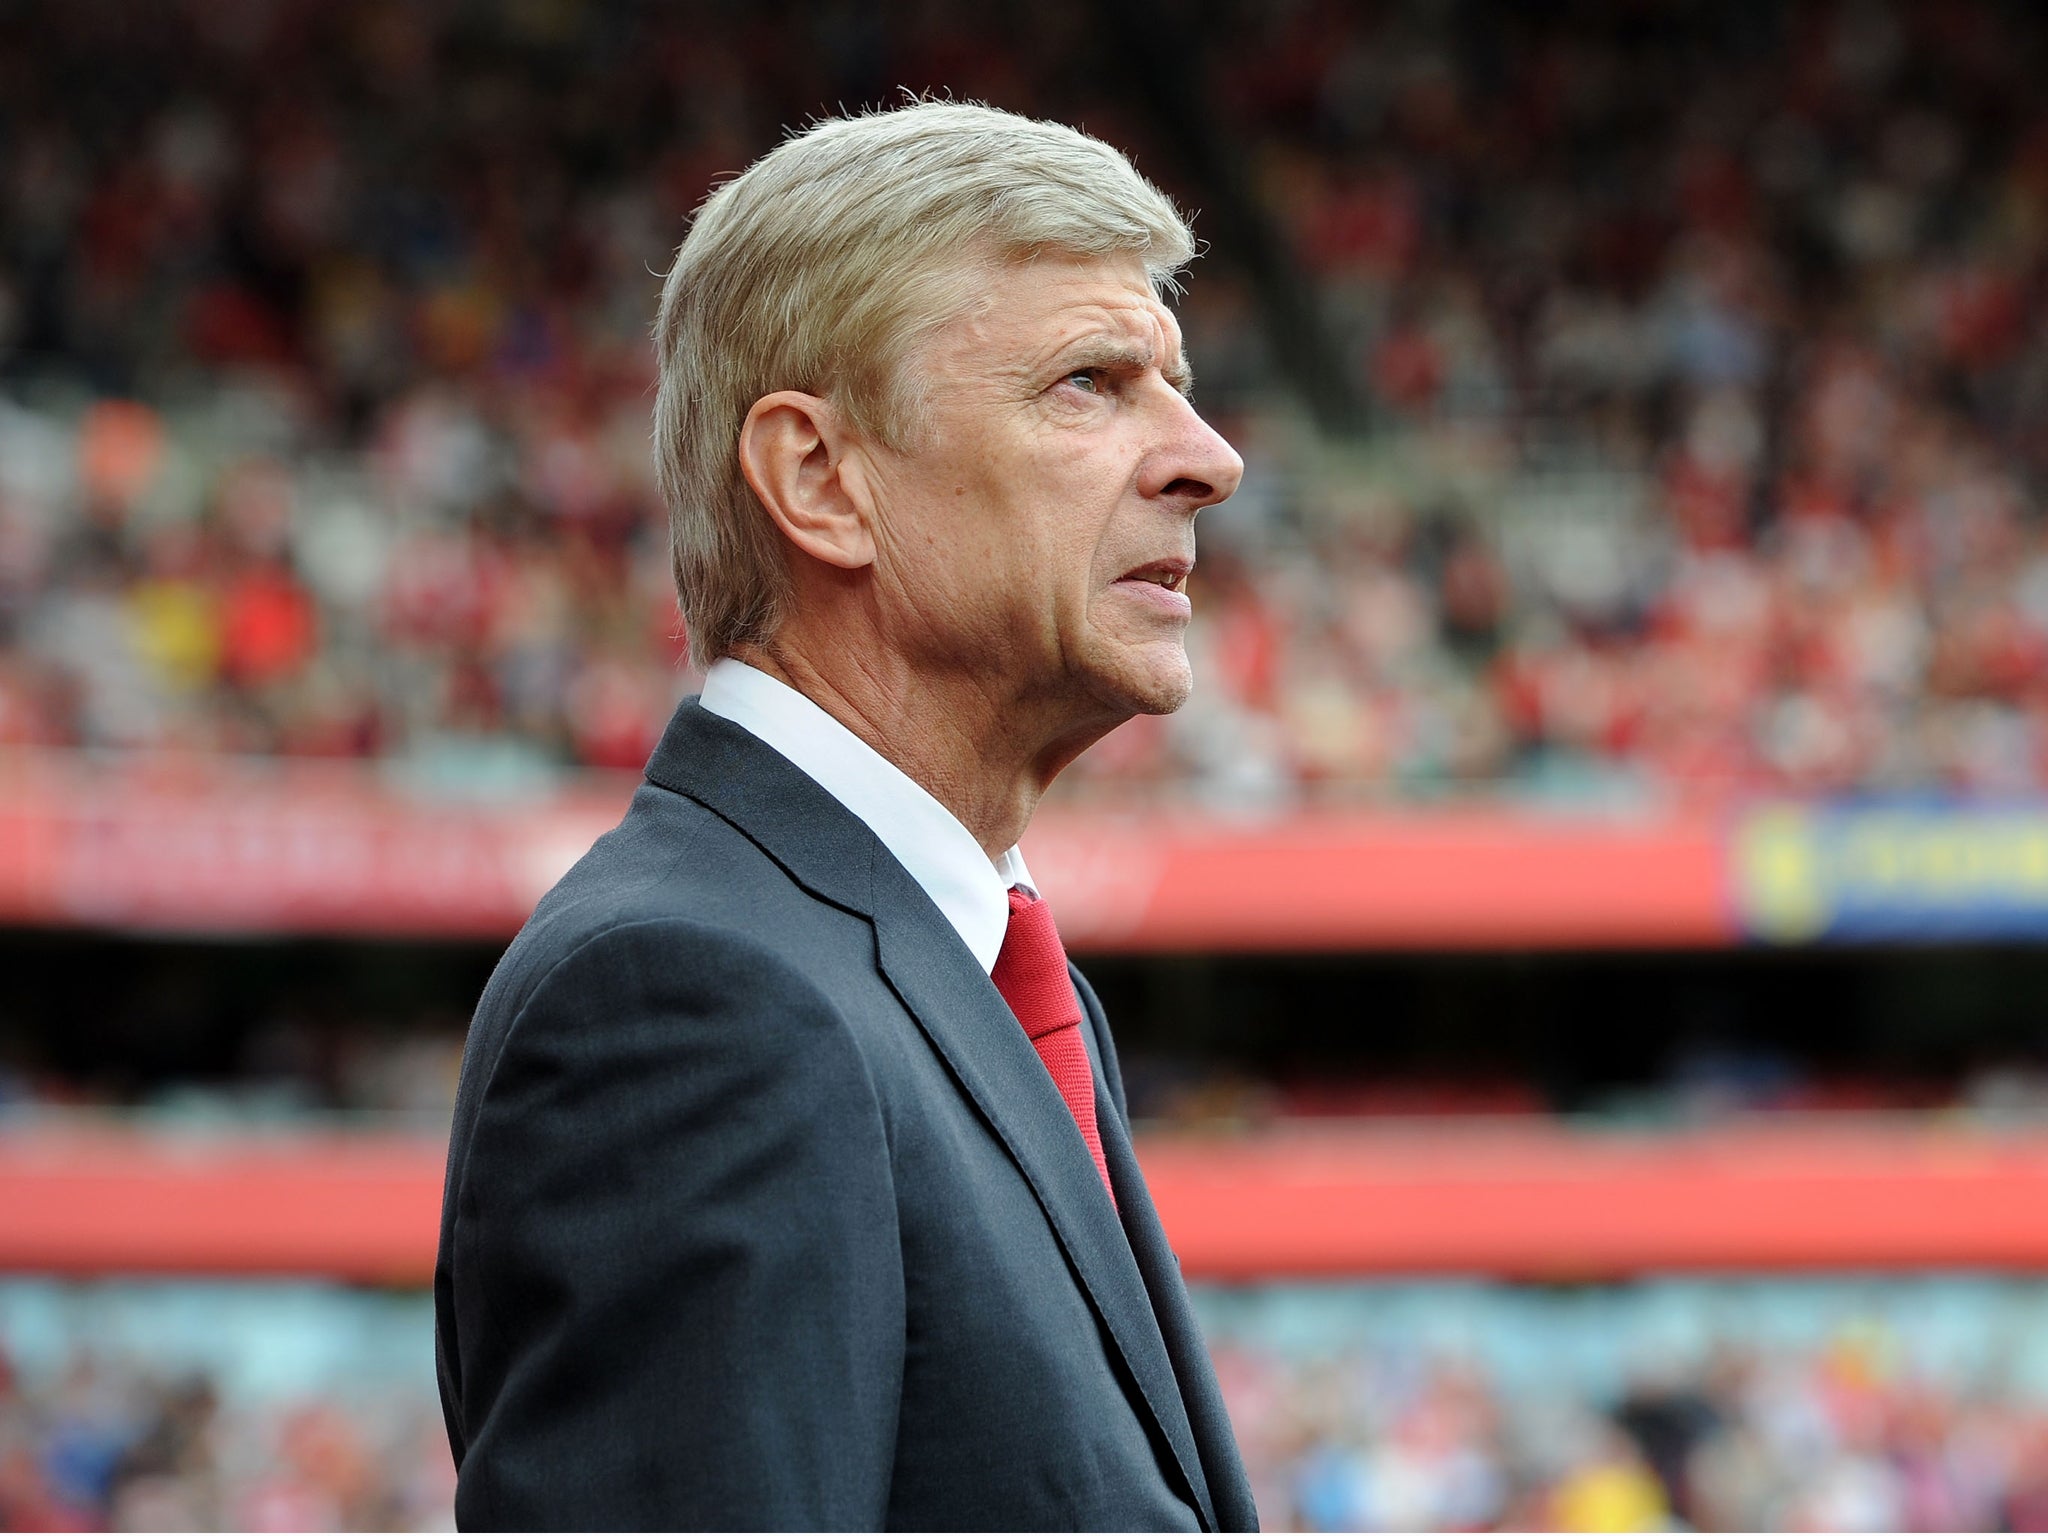 Arsene Wenger's Arsenal contract runs out in June